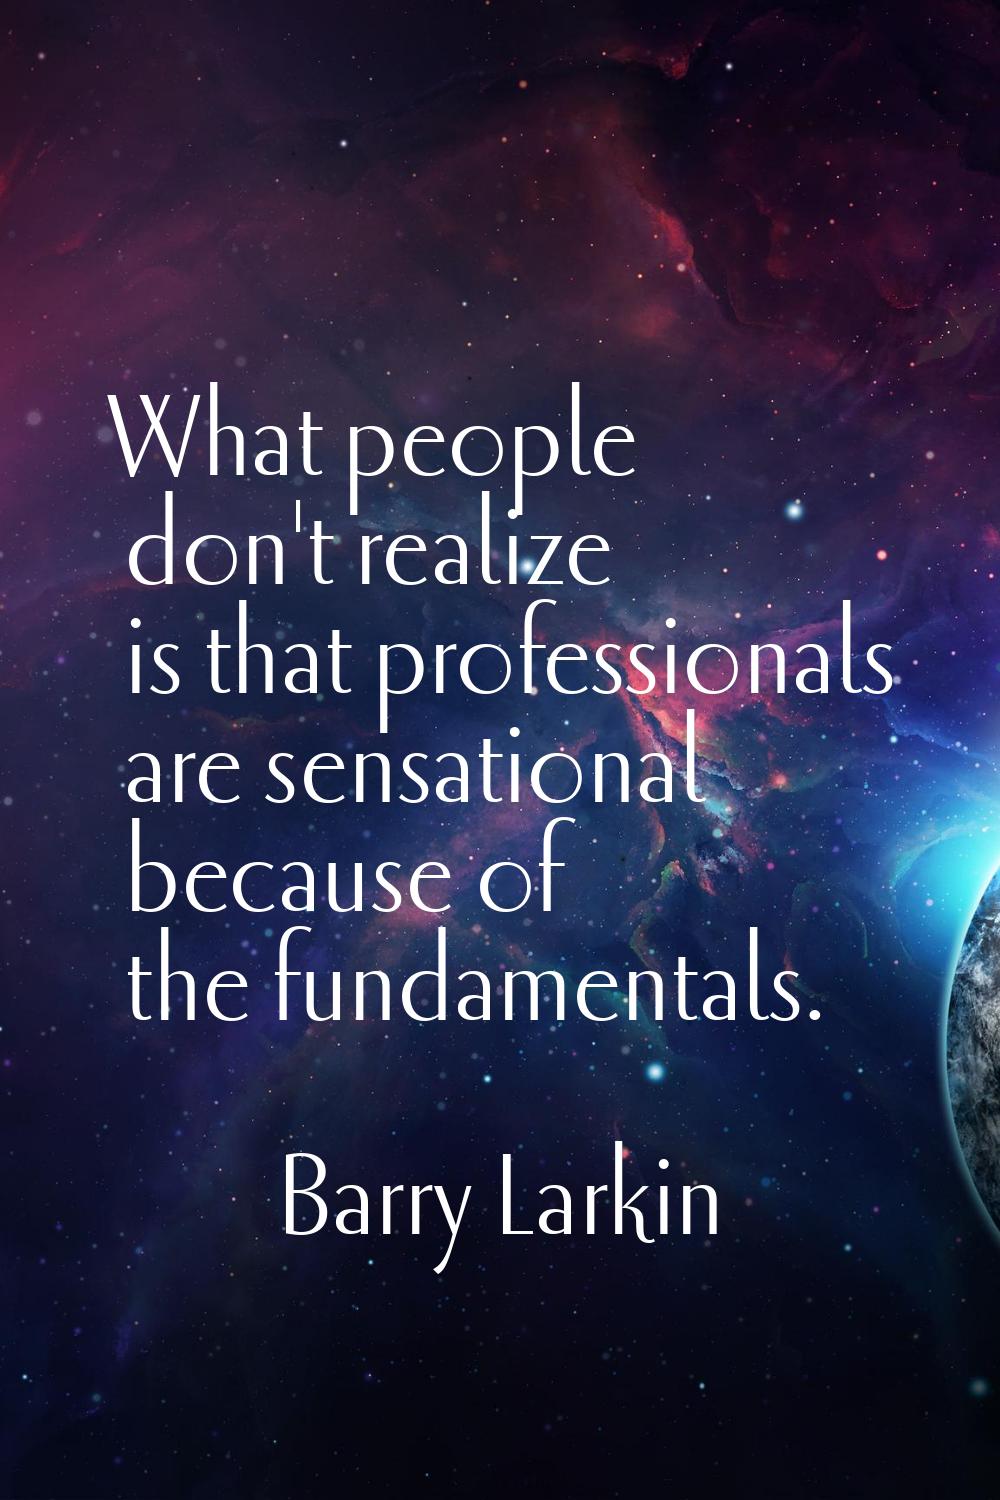 What people don't realize is that professionals are sensational because of the fundamentals.